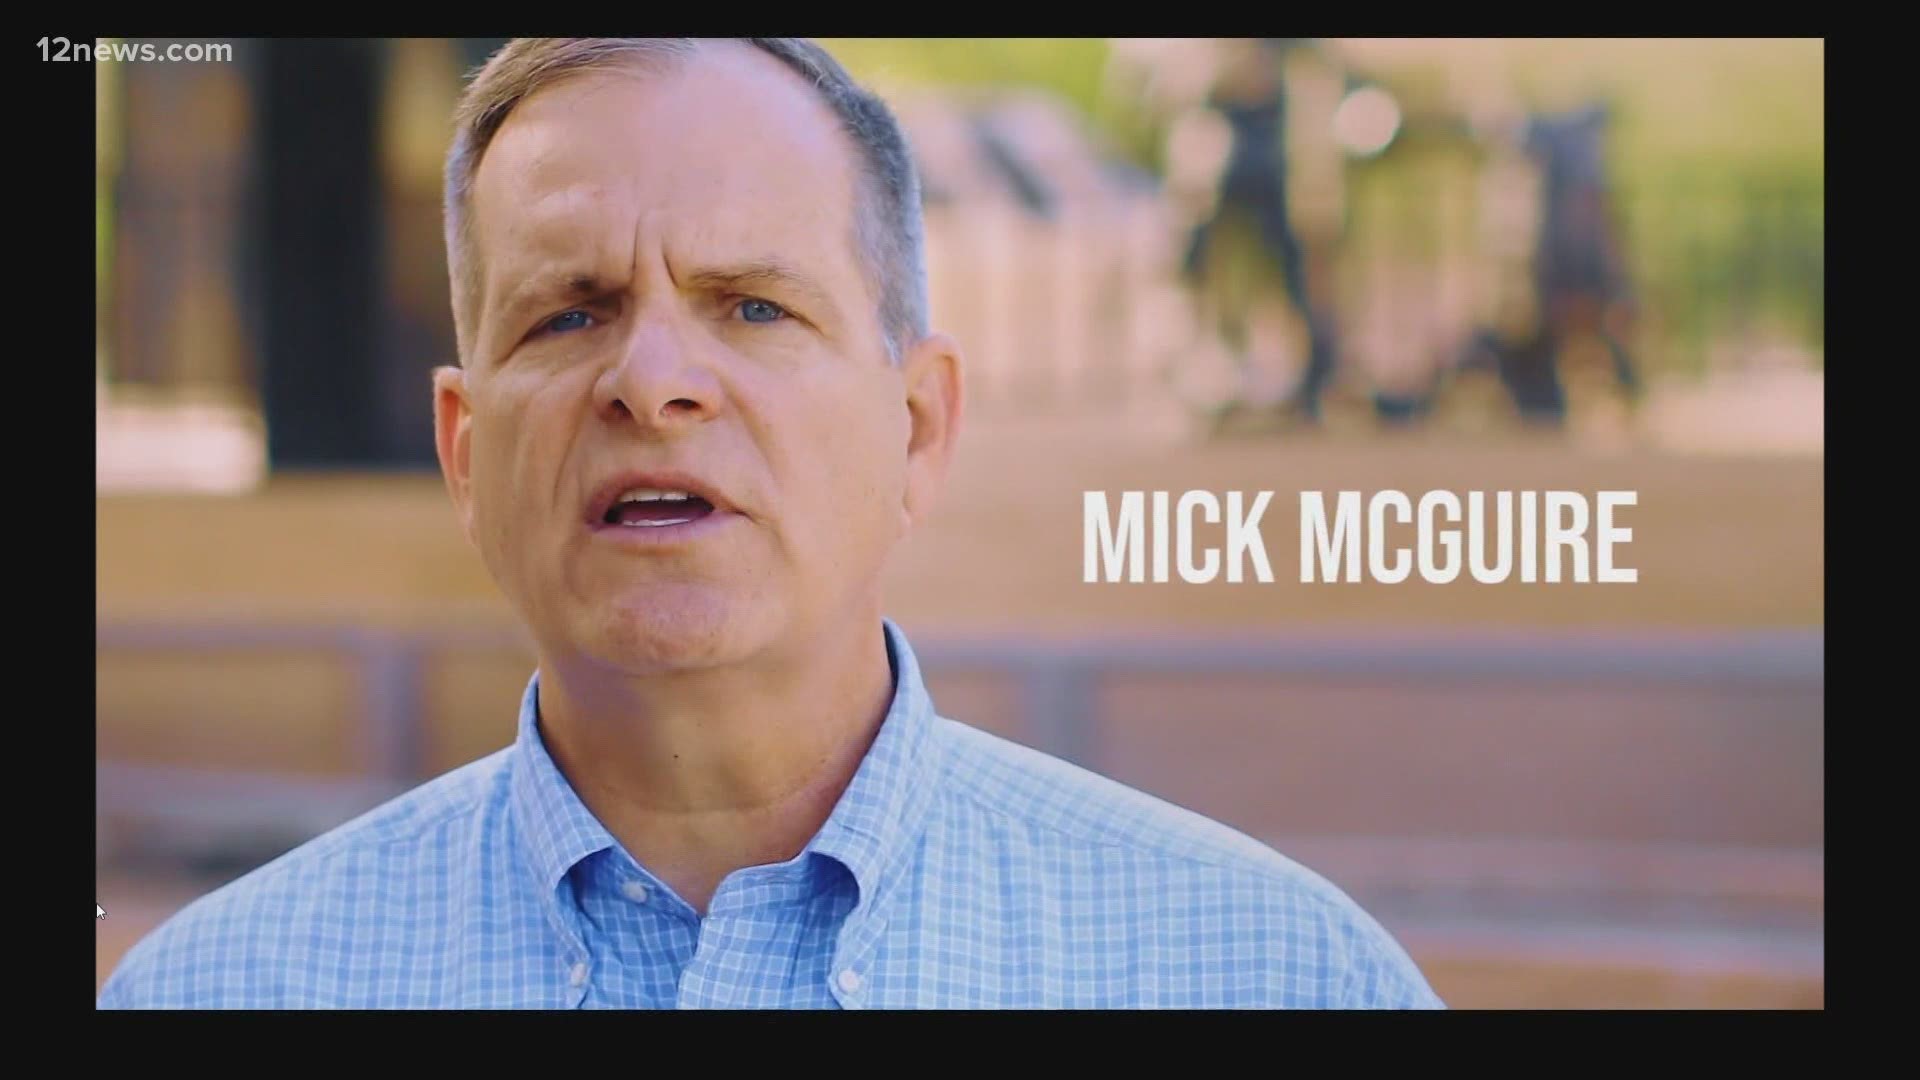 When Mick McGuire retired in April, he hinted that politics was in his future. Now, the 56-year-old career Air Force officer is starting a new job as a politician.